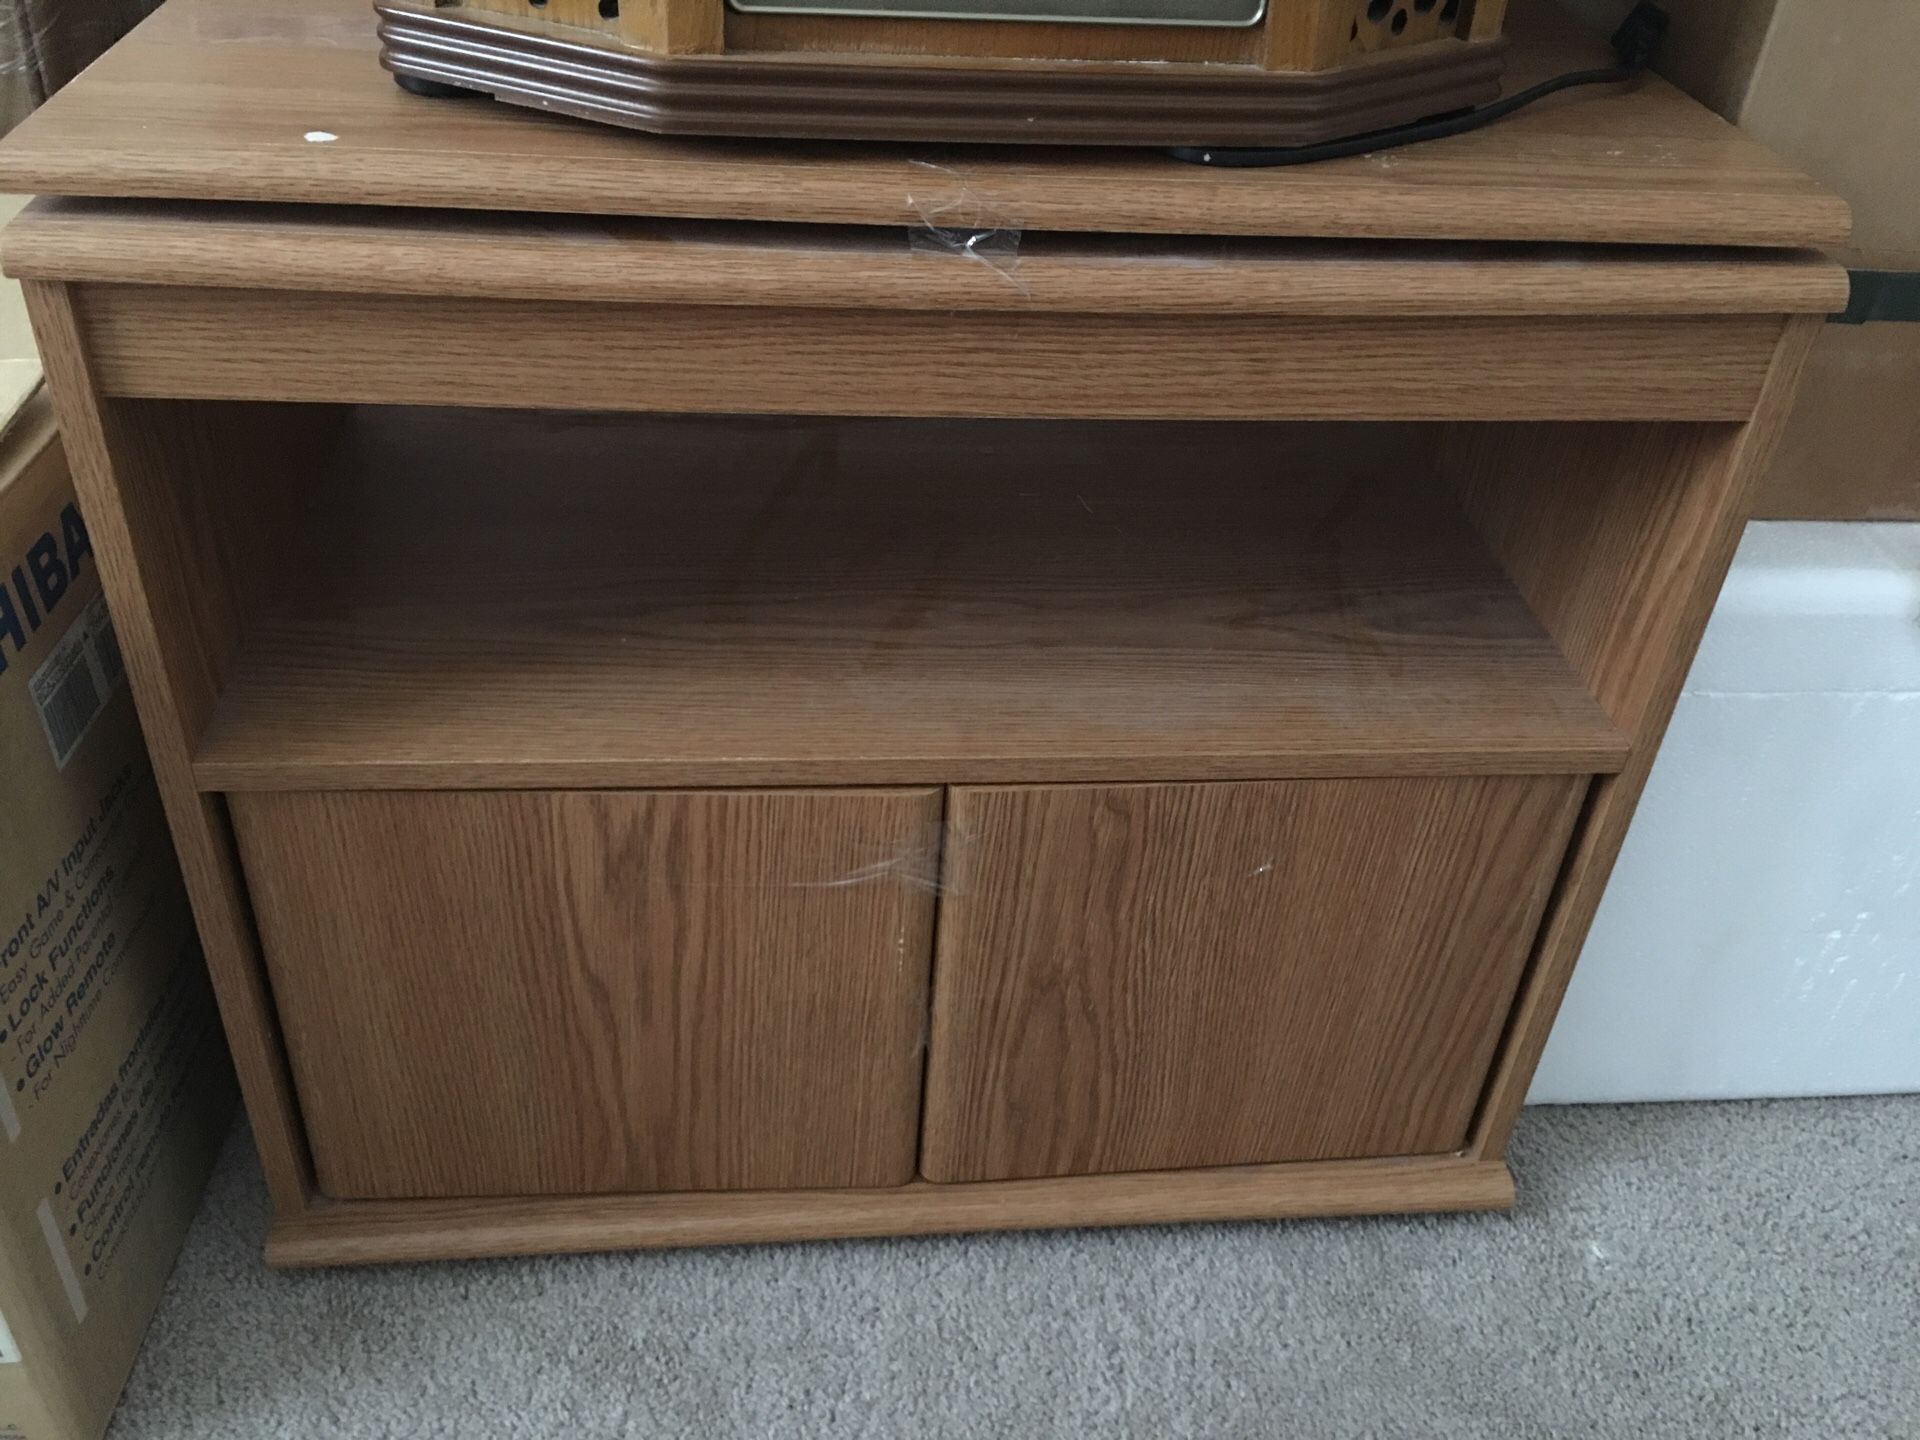 Tv stand, has marks from tape. Swivel top